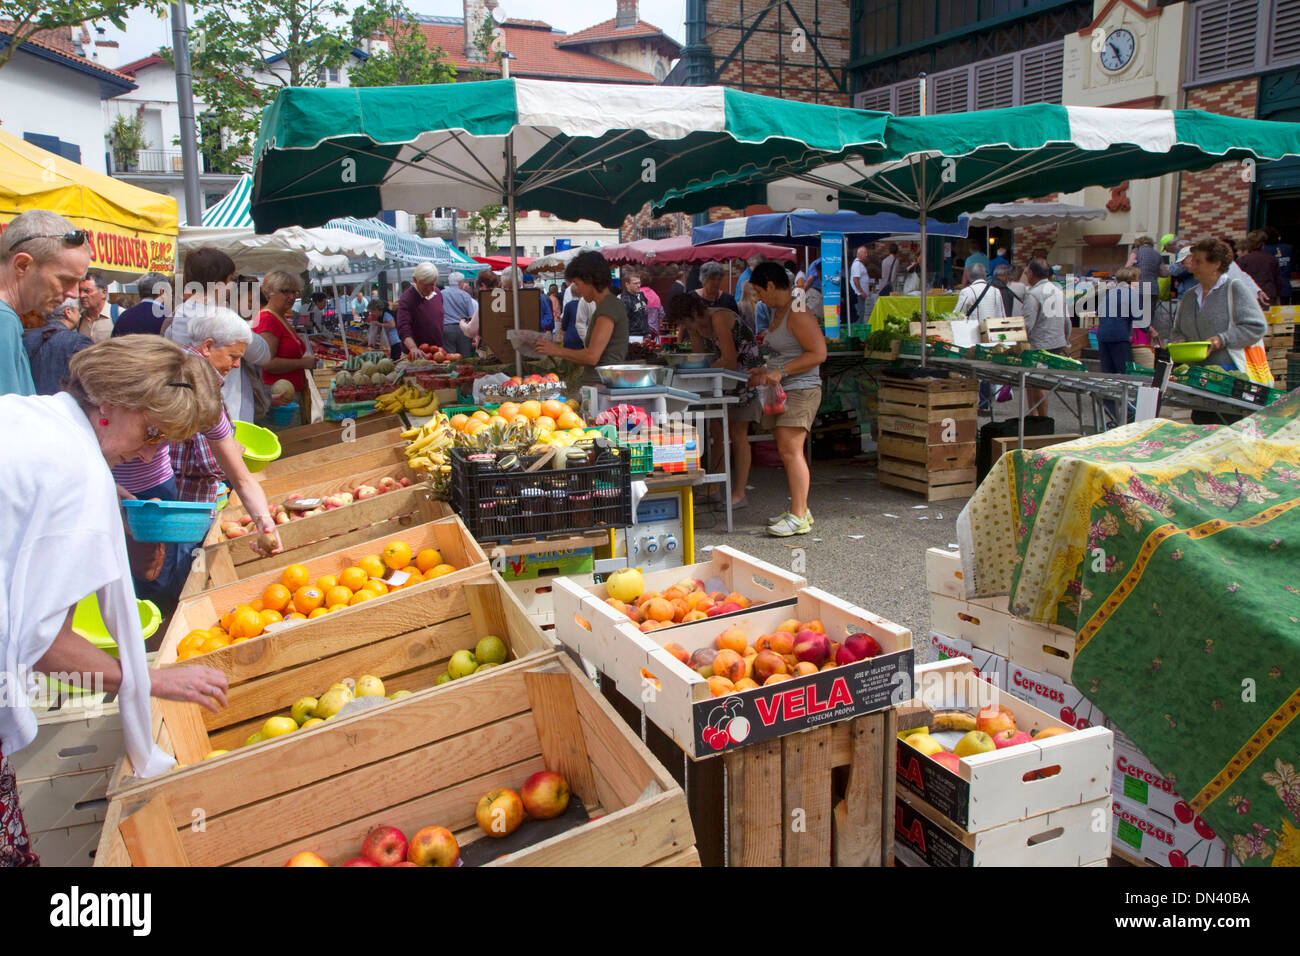 Produce being sold at an outdoor Basque market at Saint-Jean-de-Luz in the Basque province of Labourd, southwestern France. Stock Photo